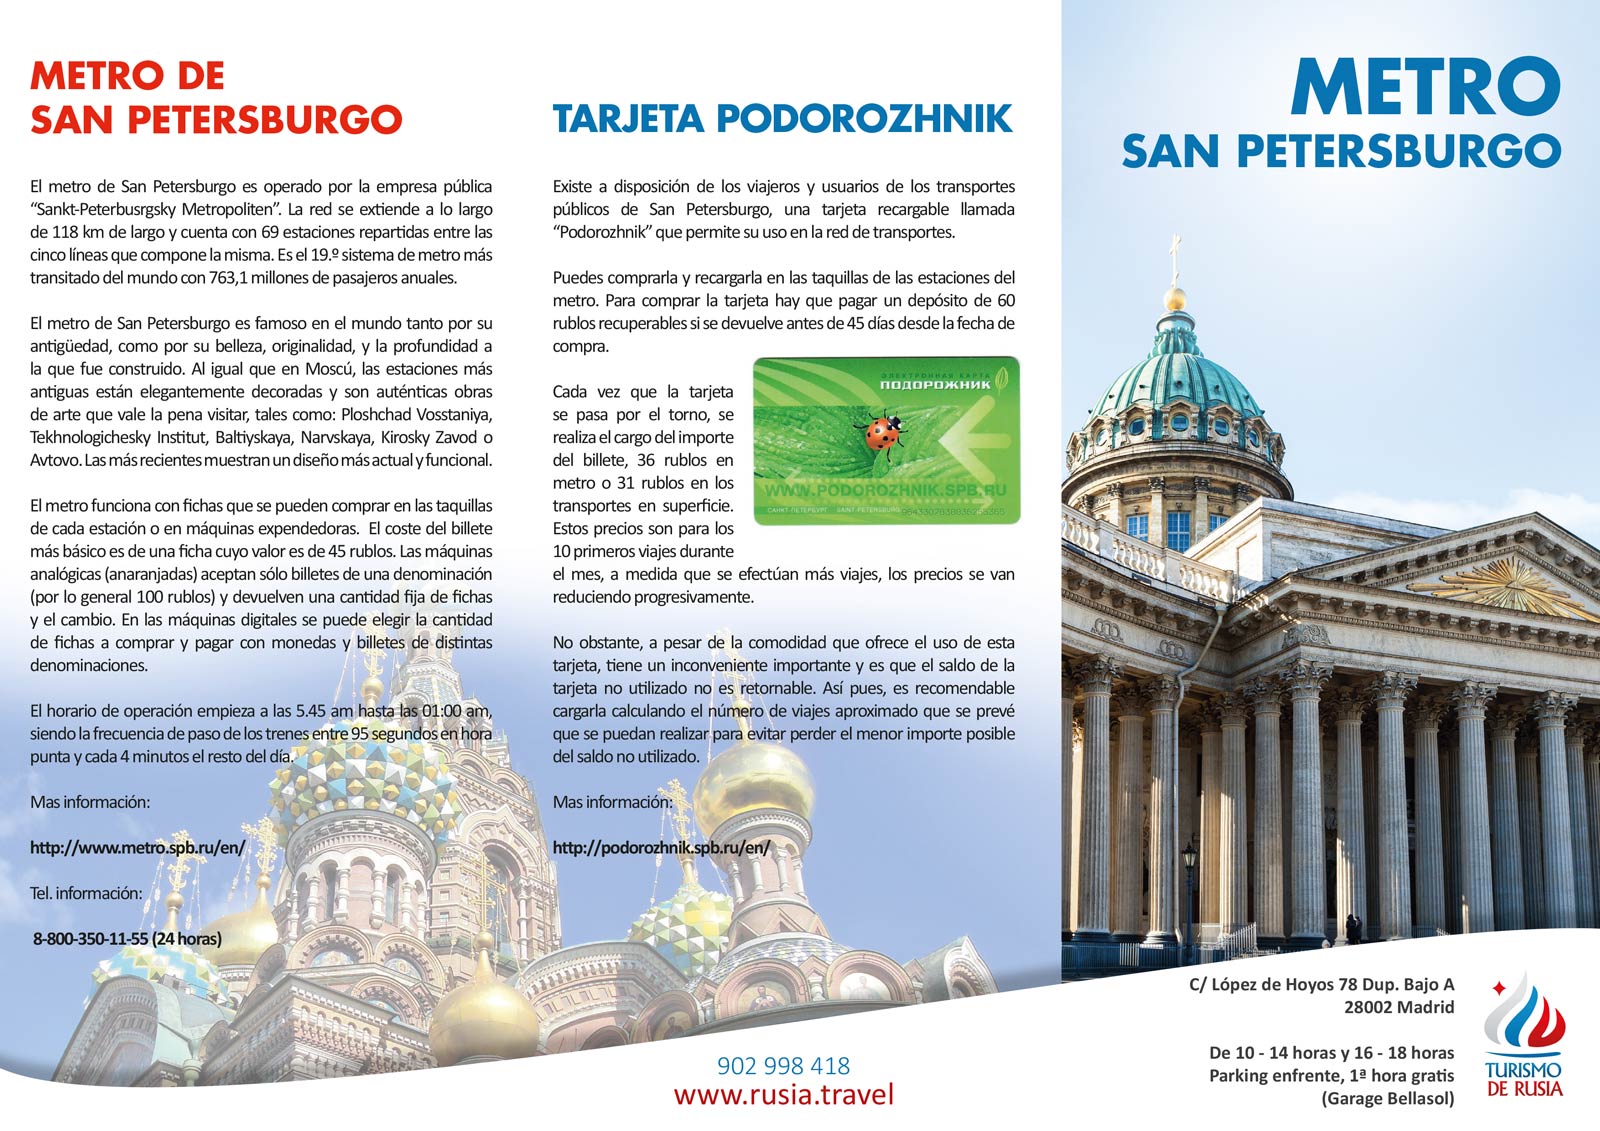 Graphic and creative design of flyers, brochures, diptychs and triptychs for advertising campaign for travel and tourism agency in Russia